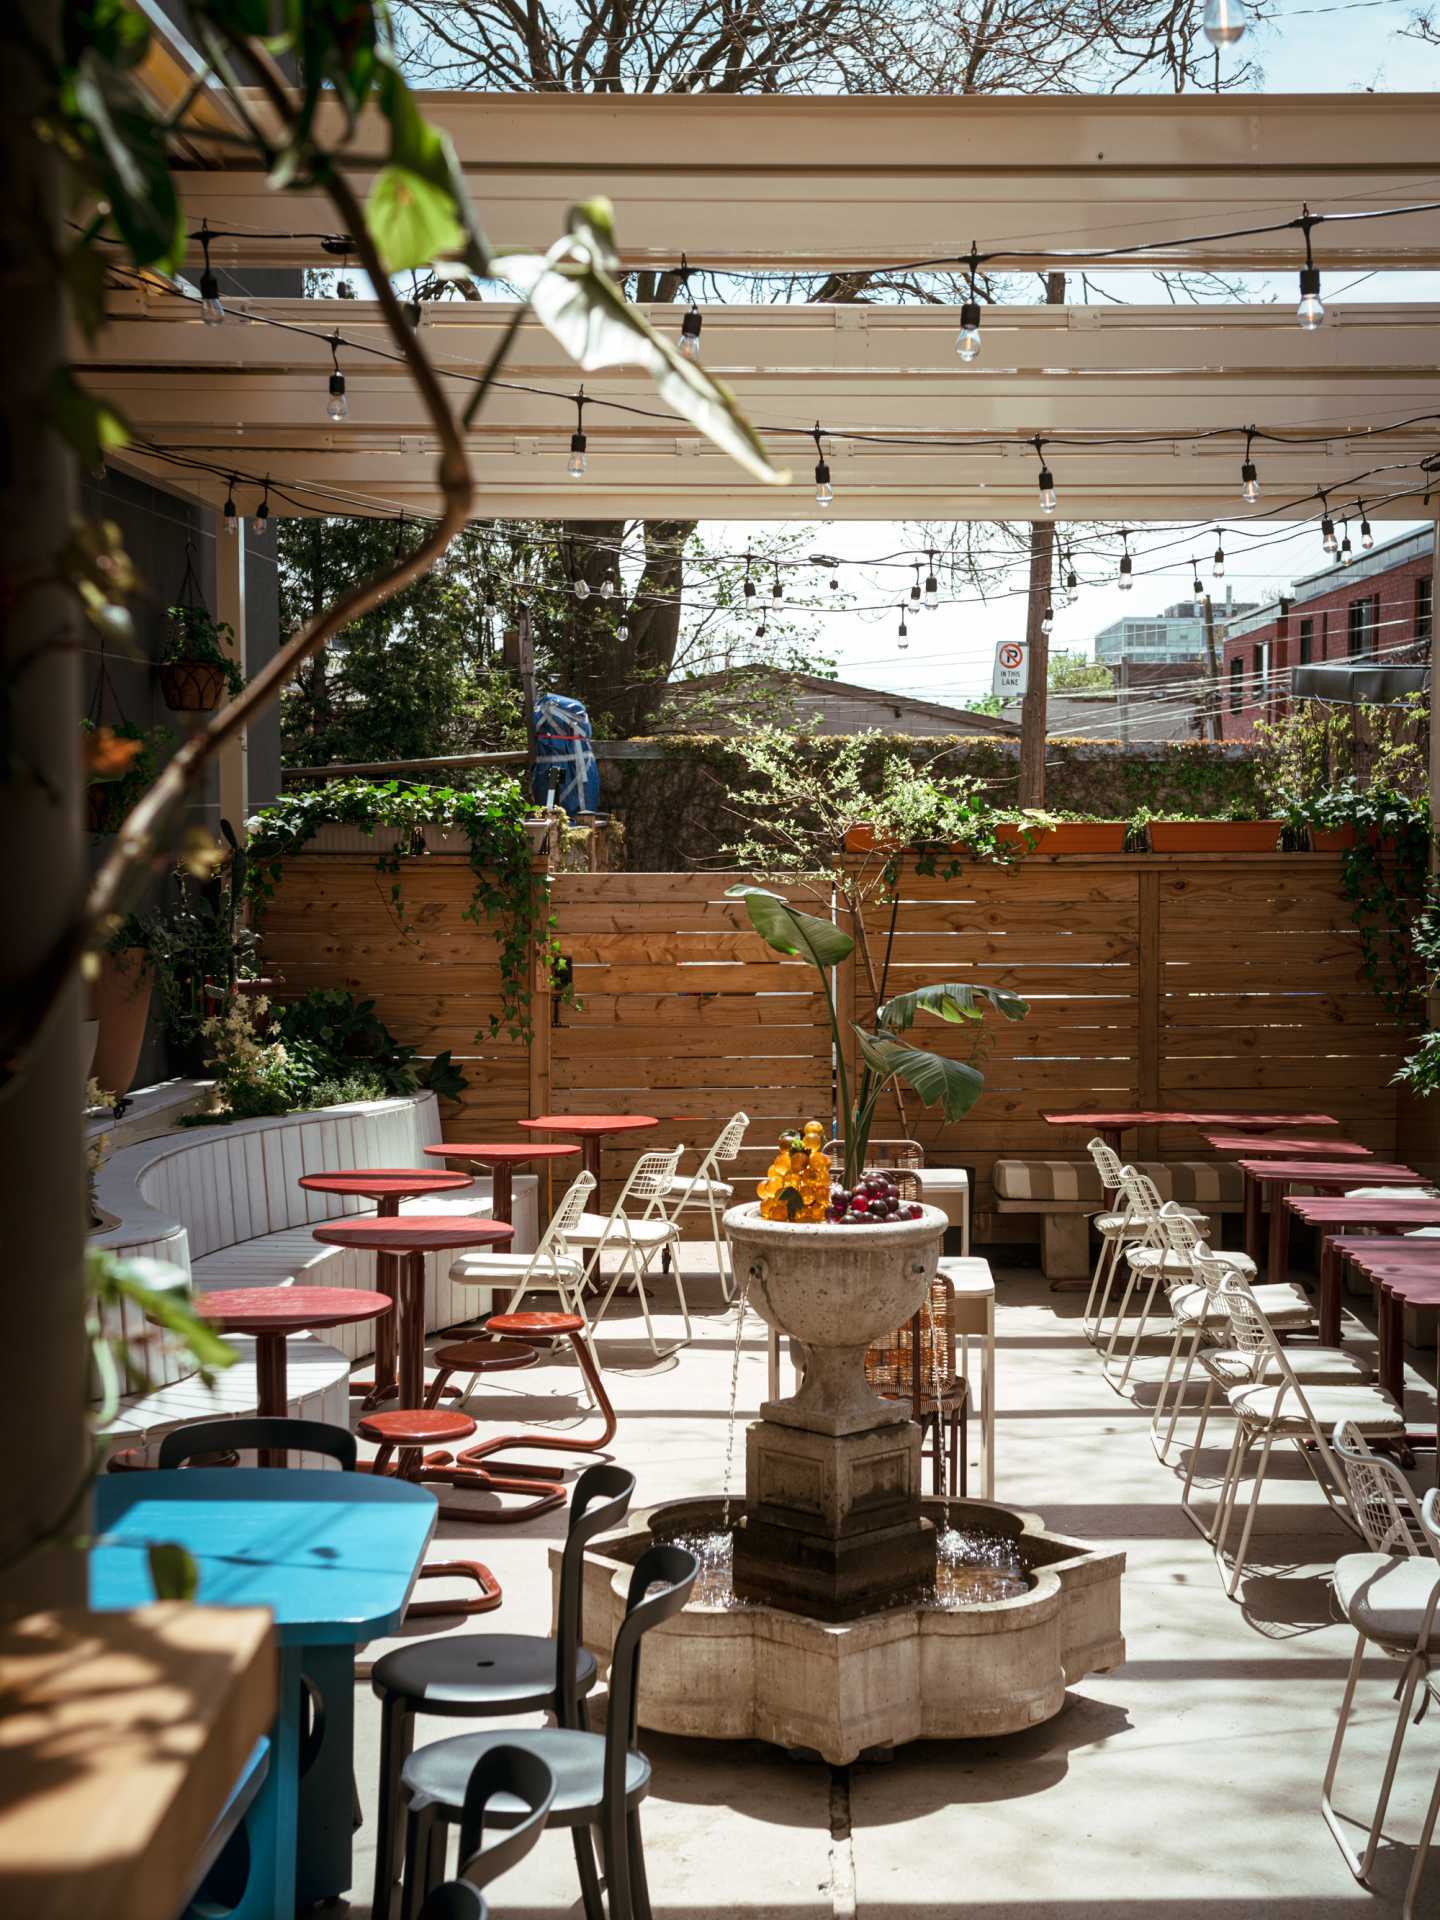 The best patios in Toronto | The Grape Witches patio on Dundas West